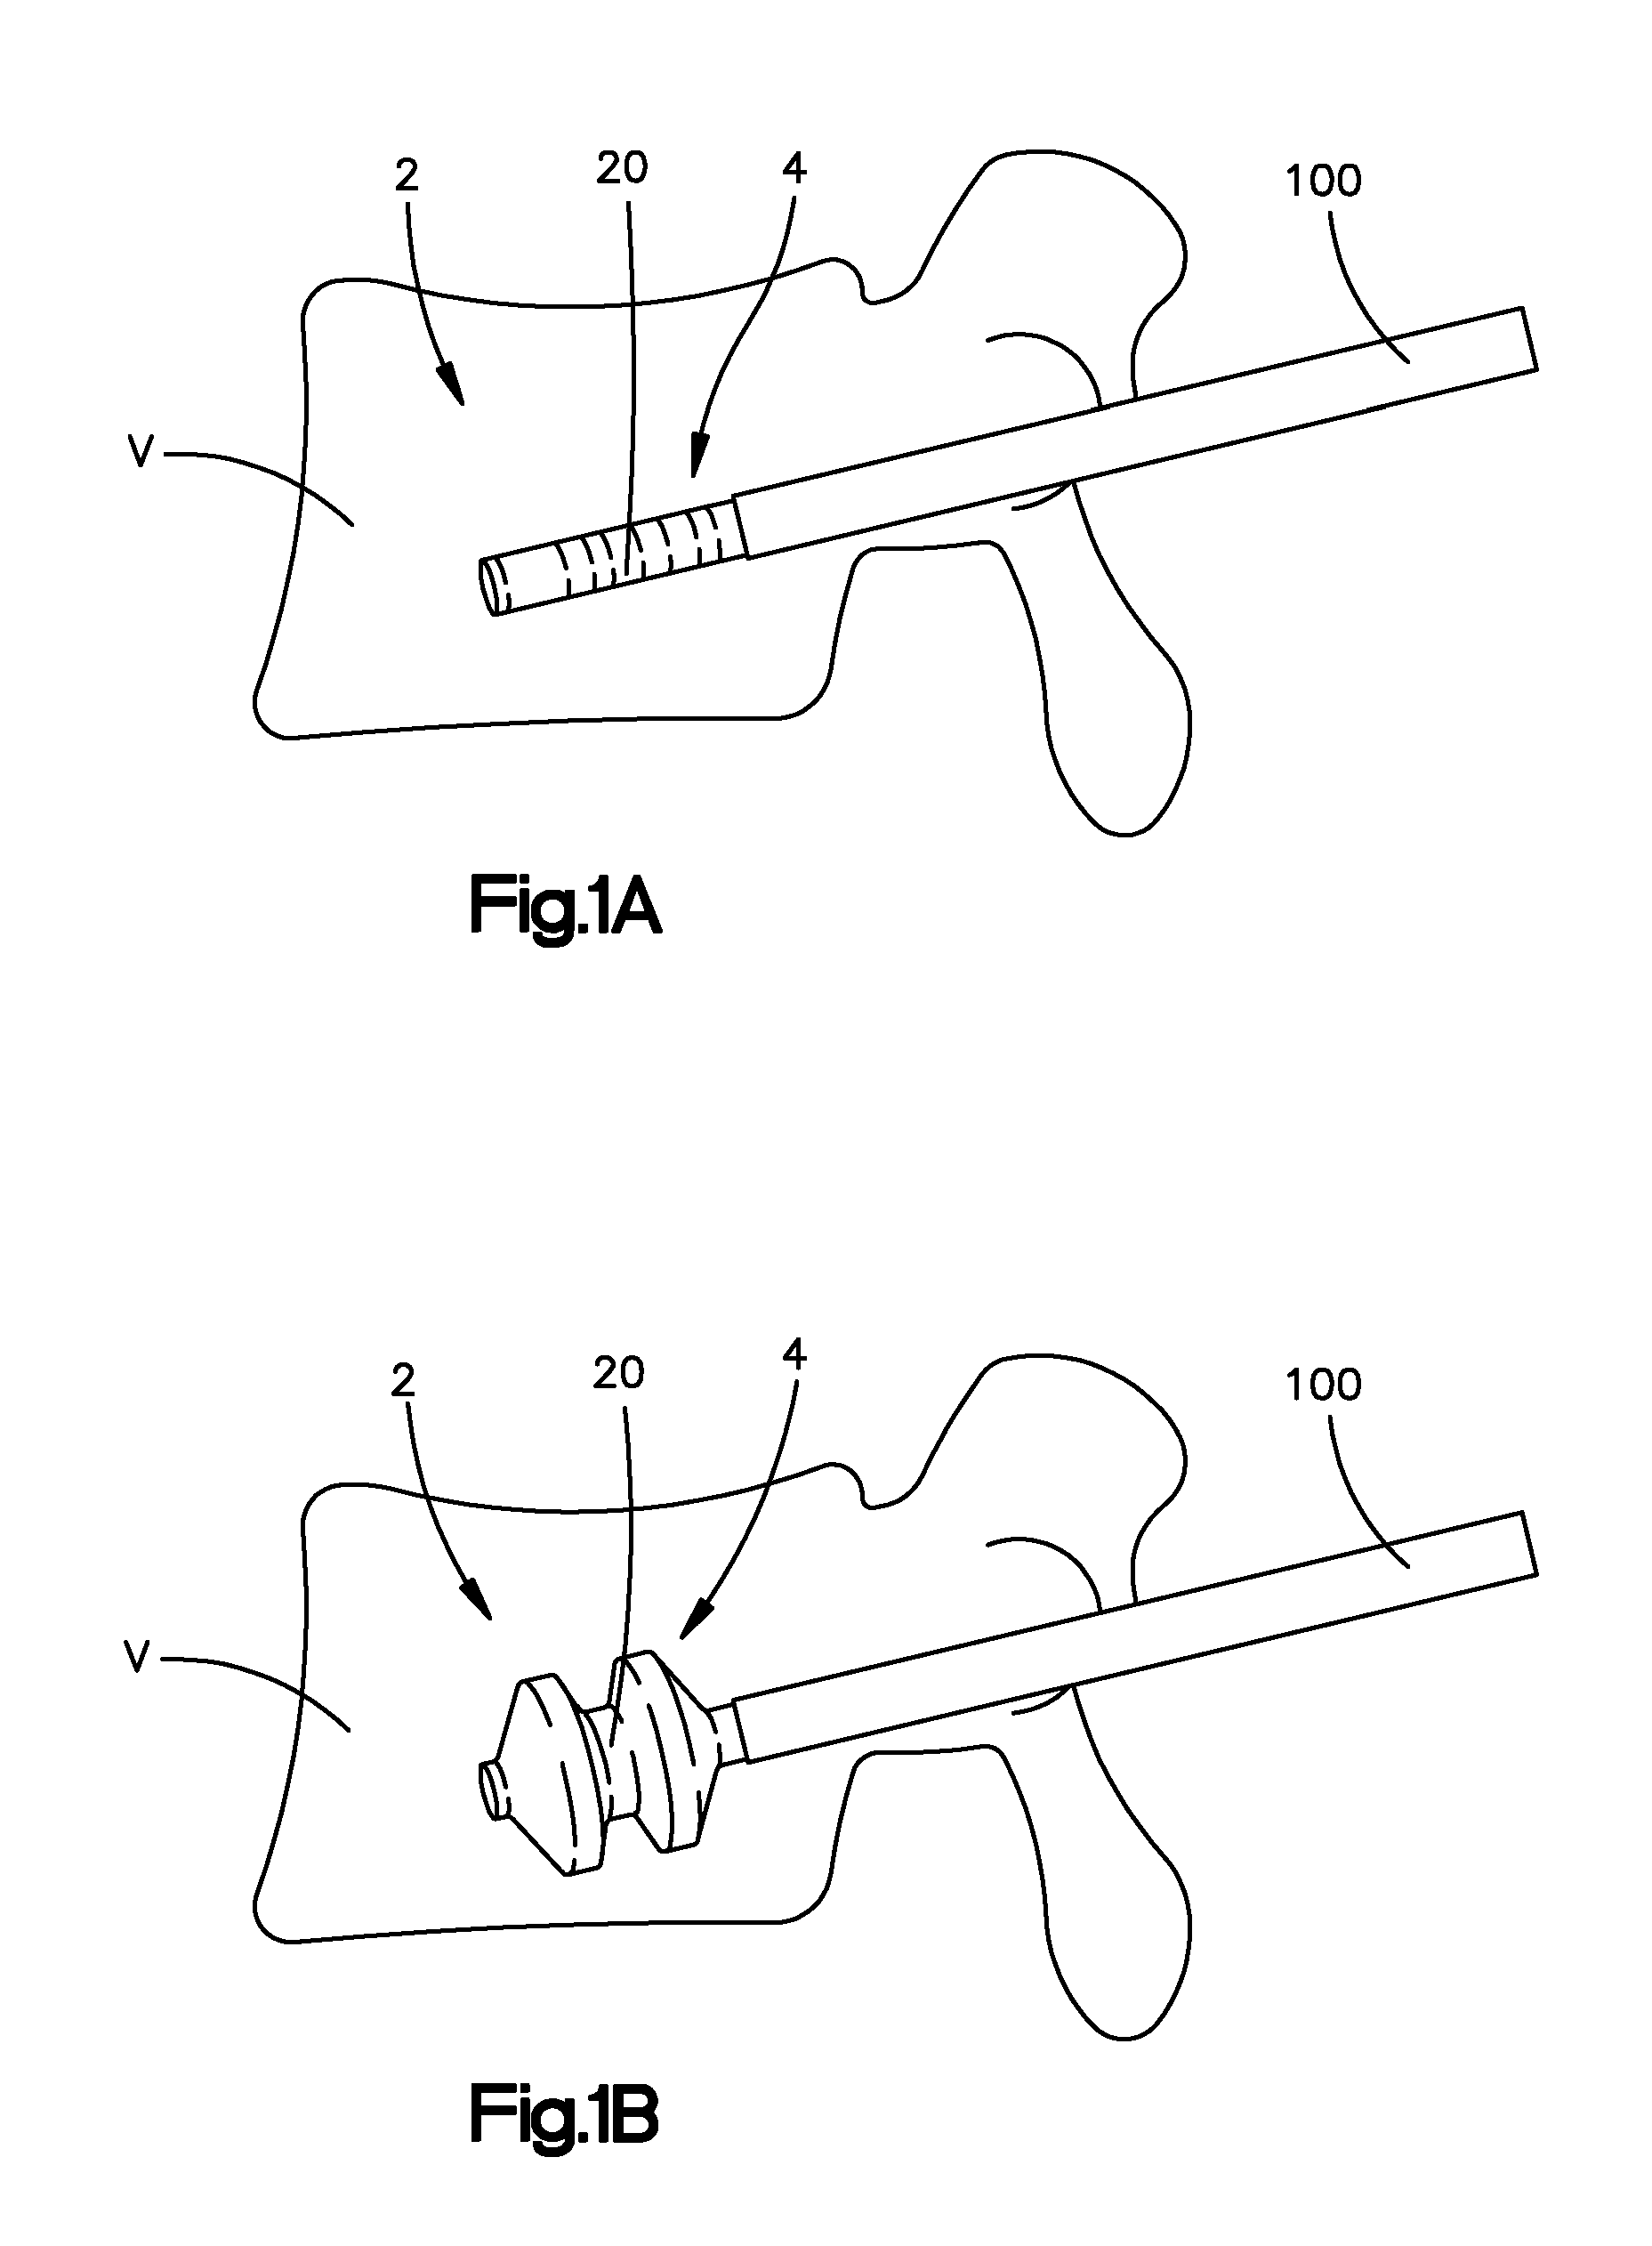 Porous containment device and associated method for stabilization of vertebral compression fractures